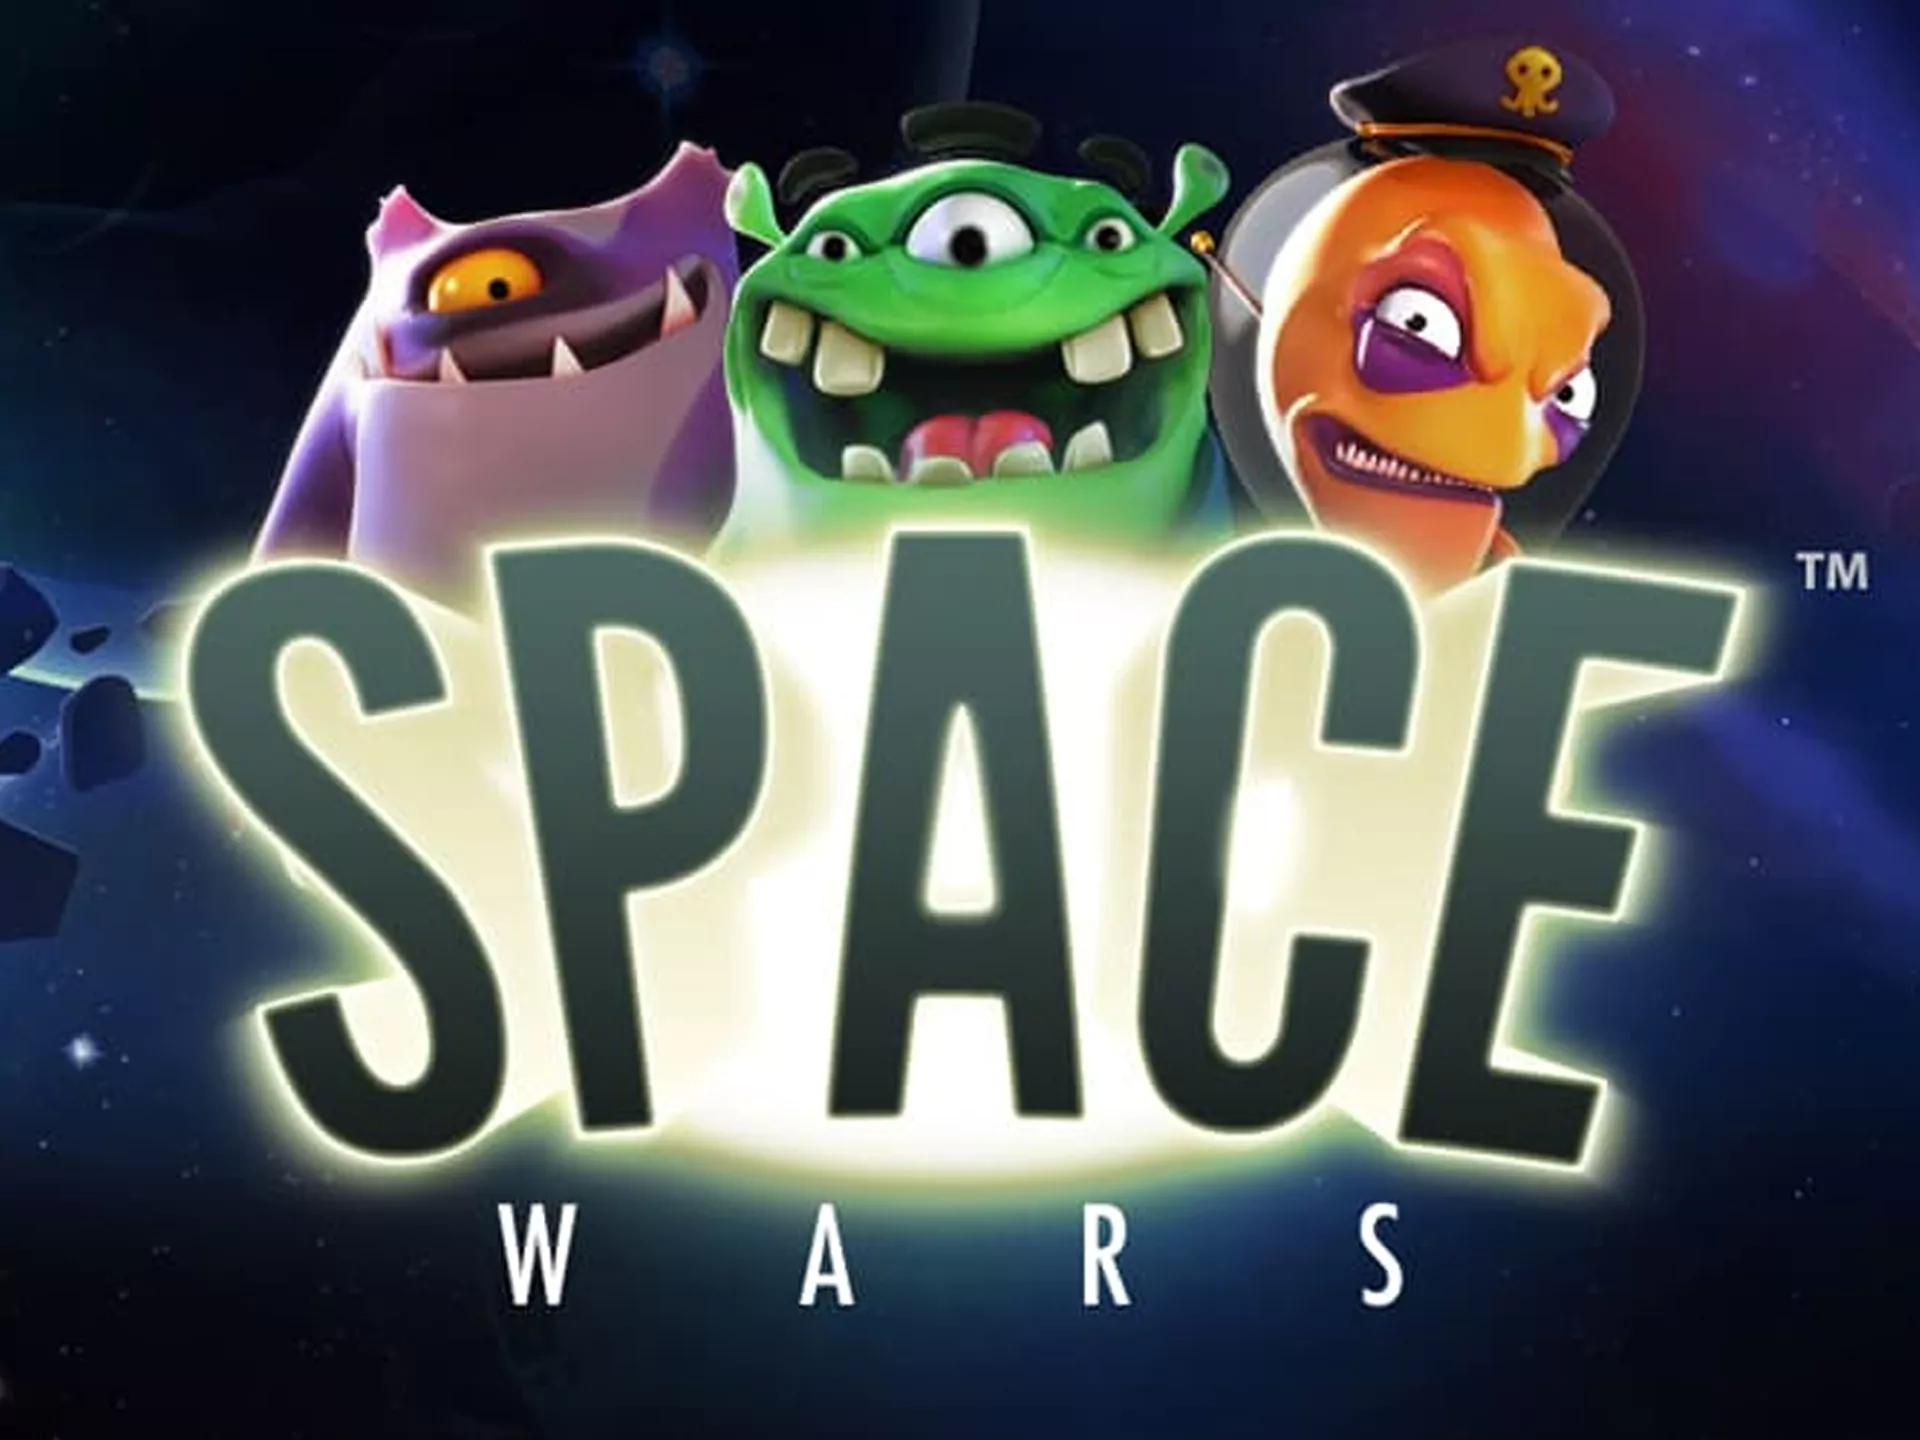 Spin Space Wars slots and win big amount of money.